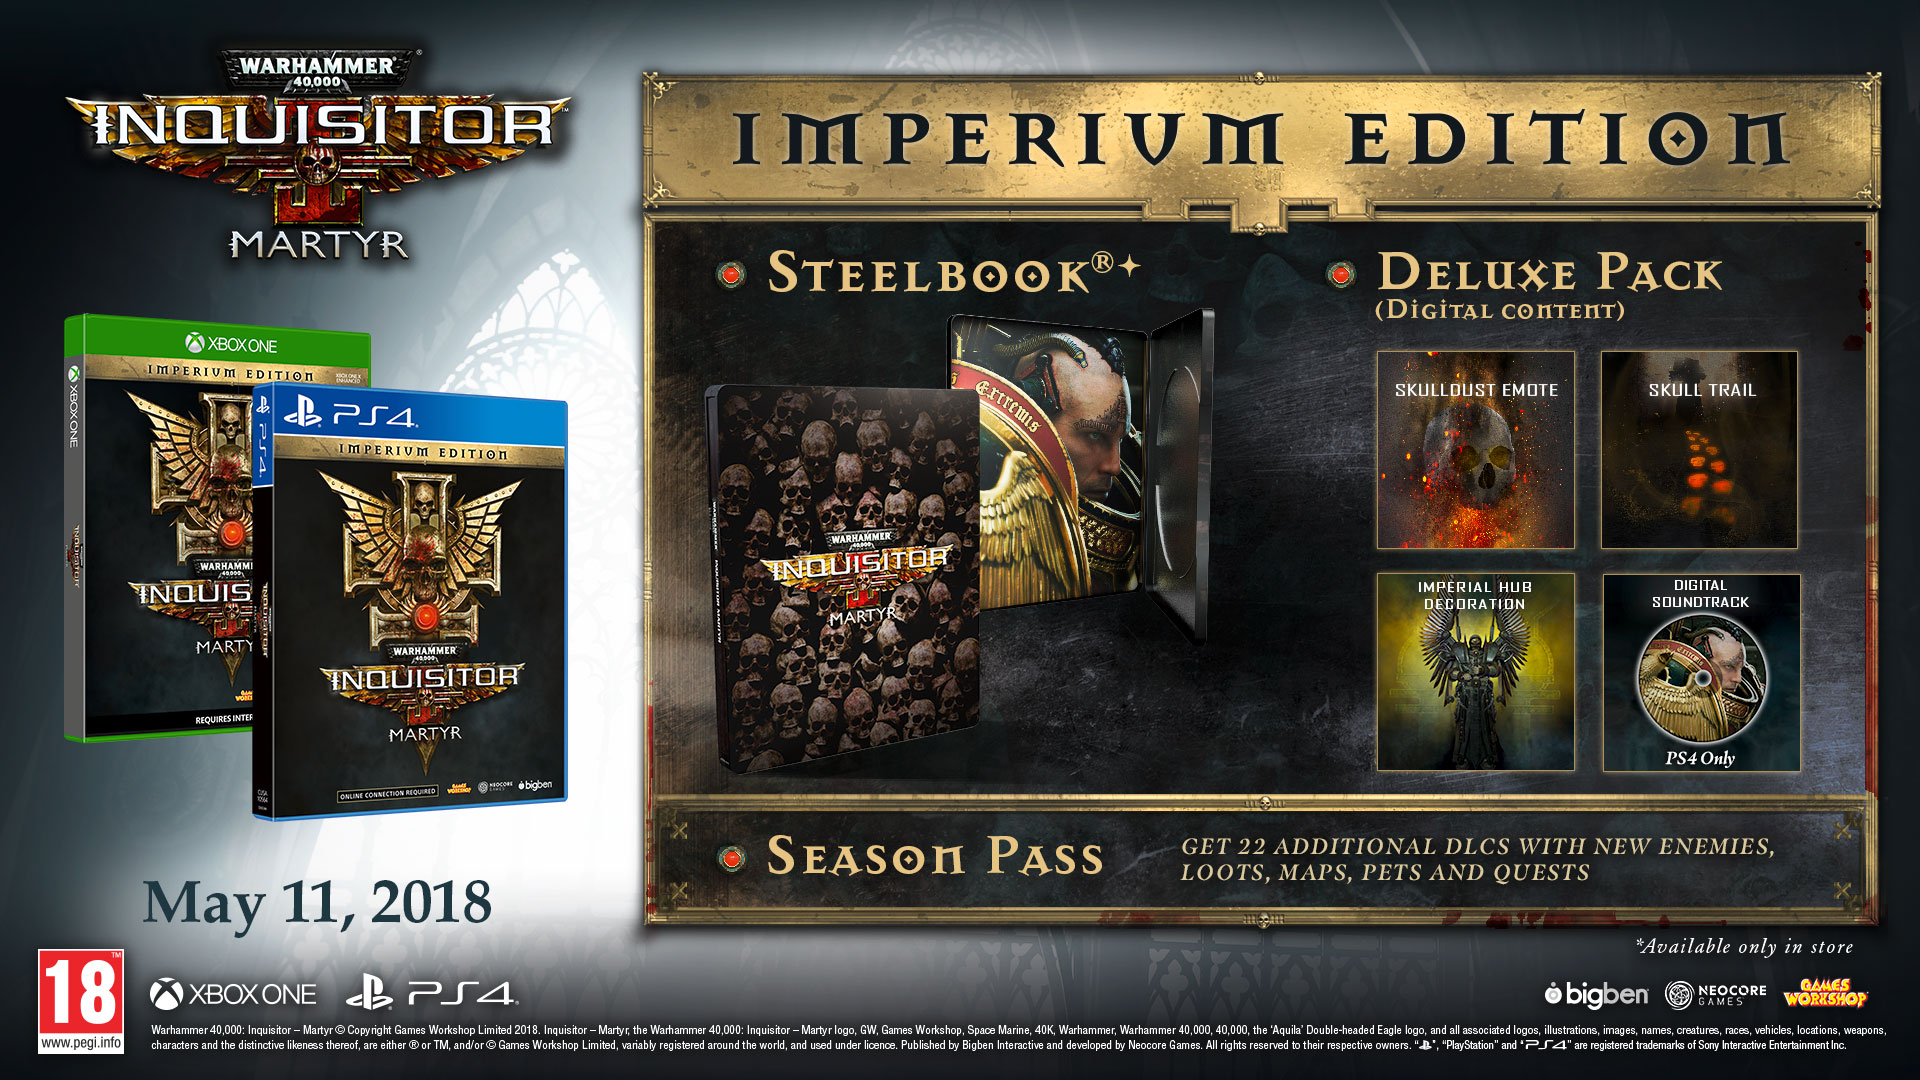 Warhammer ps4. Warhammer 40000 Inquisitor Martyr IMPERIUM Edition ps4. Warhammer 40000 Inquisitor Martyr IMPERIUM Edition ps4 unbox. Вархаммер Инквизитор Мартур. Warhammer 40000 Inquisitor Martyr Sony ps4.